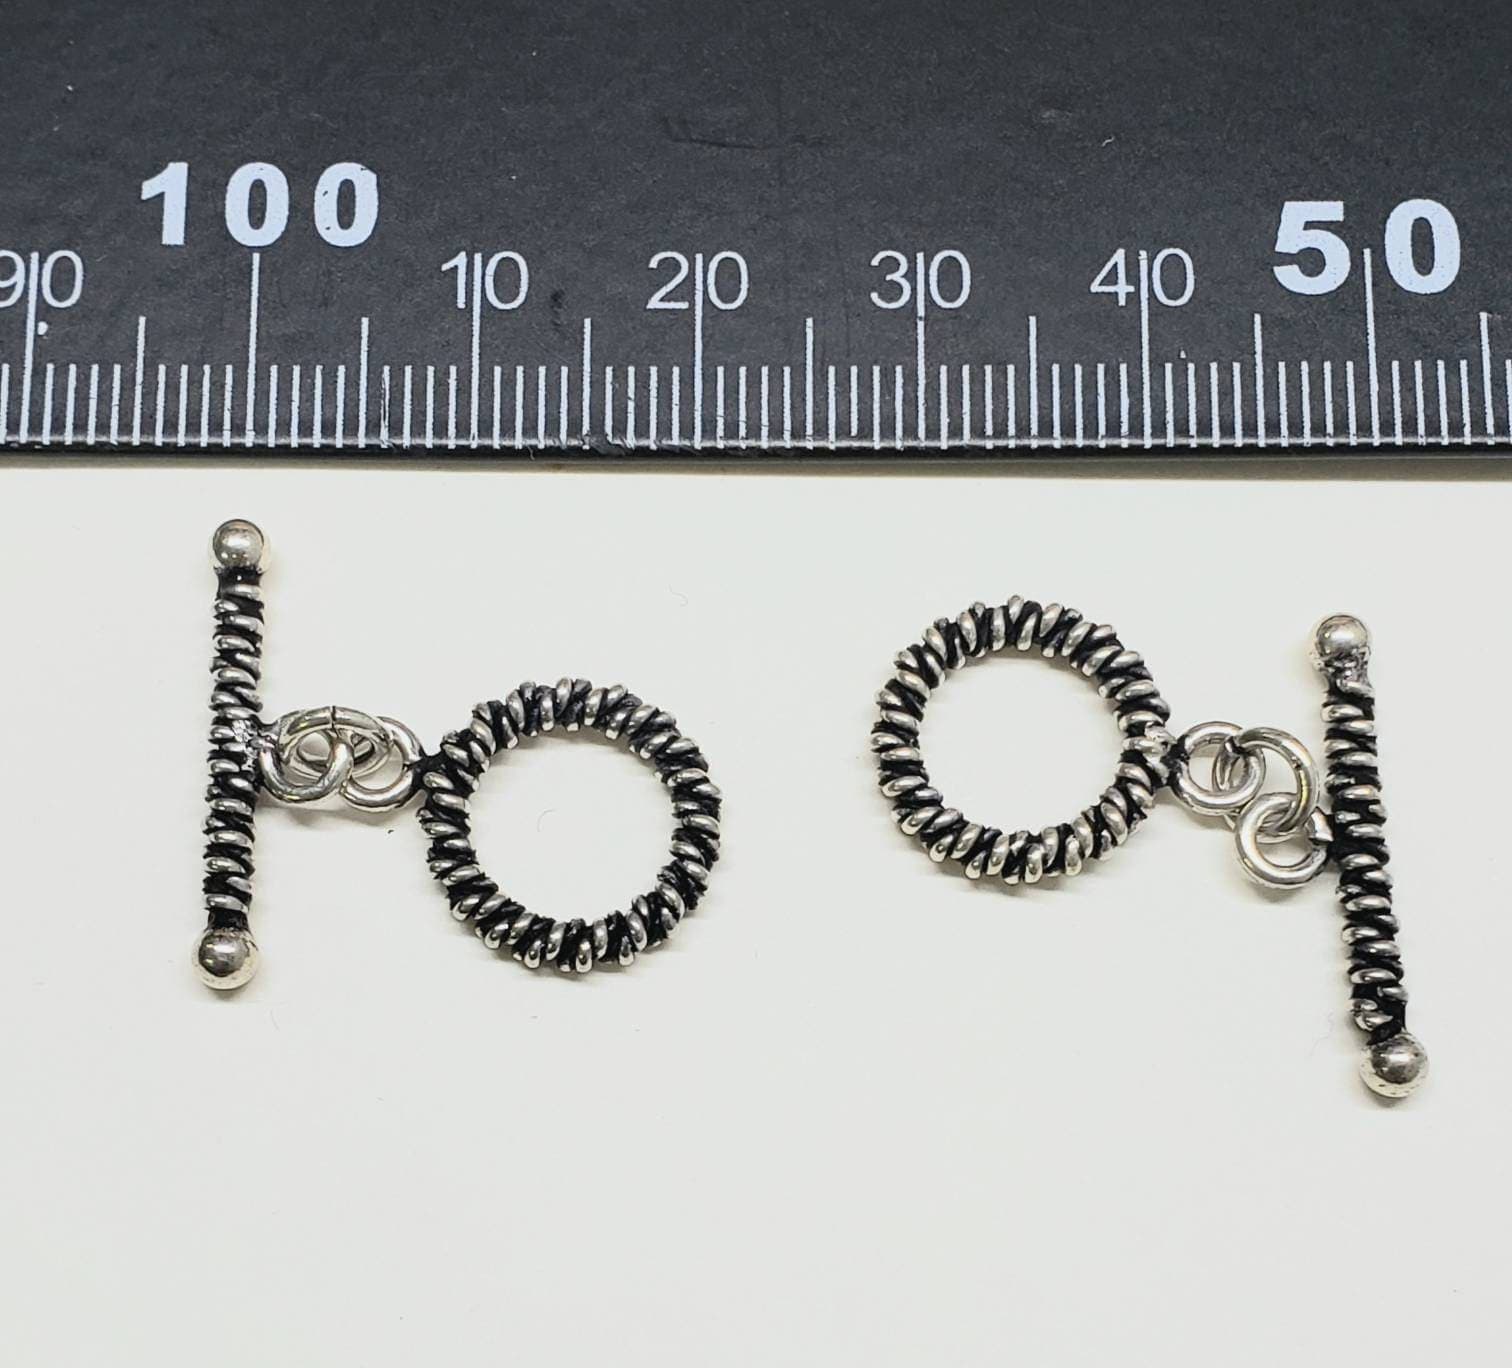 2 sets 925 sterling silver Bali 13mm round rope toggle clasp. Vintage Handmade antique finished Bali toggle for Jewelry making supplies.